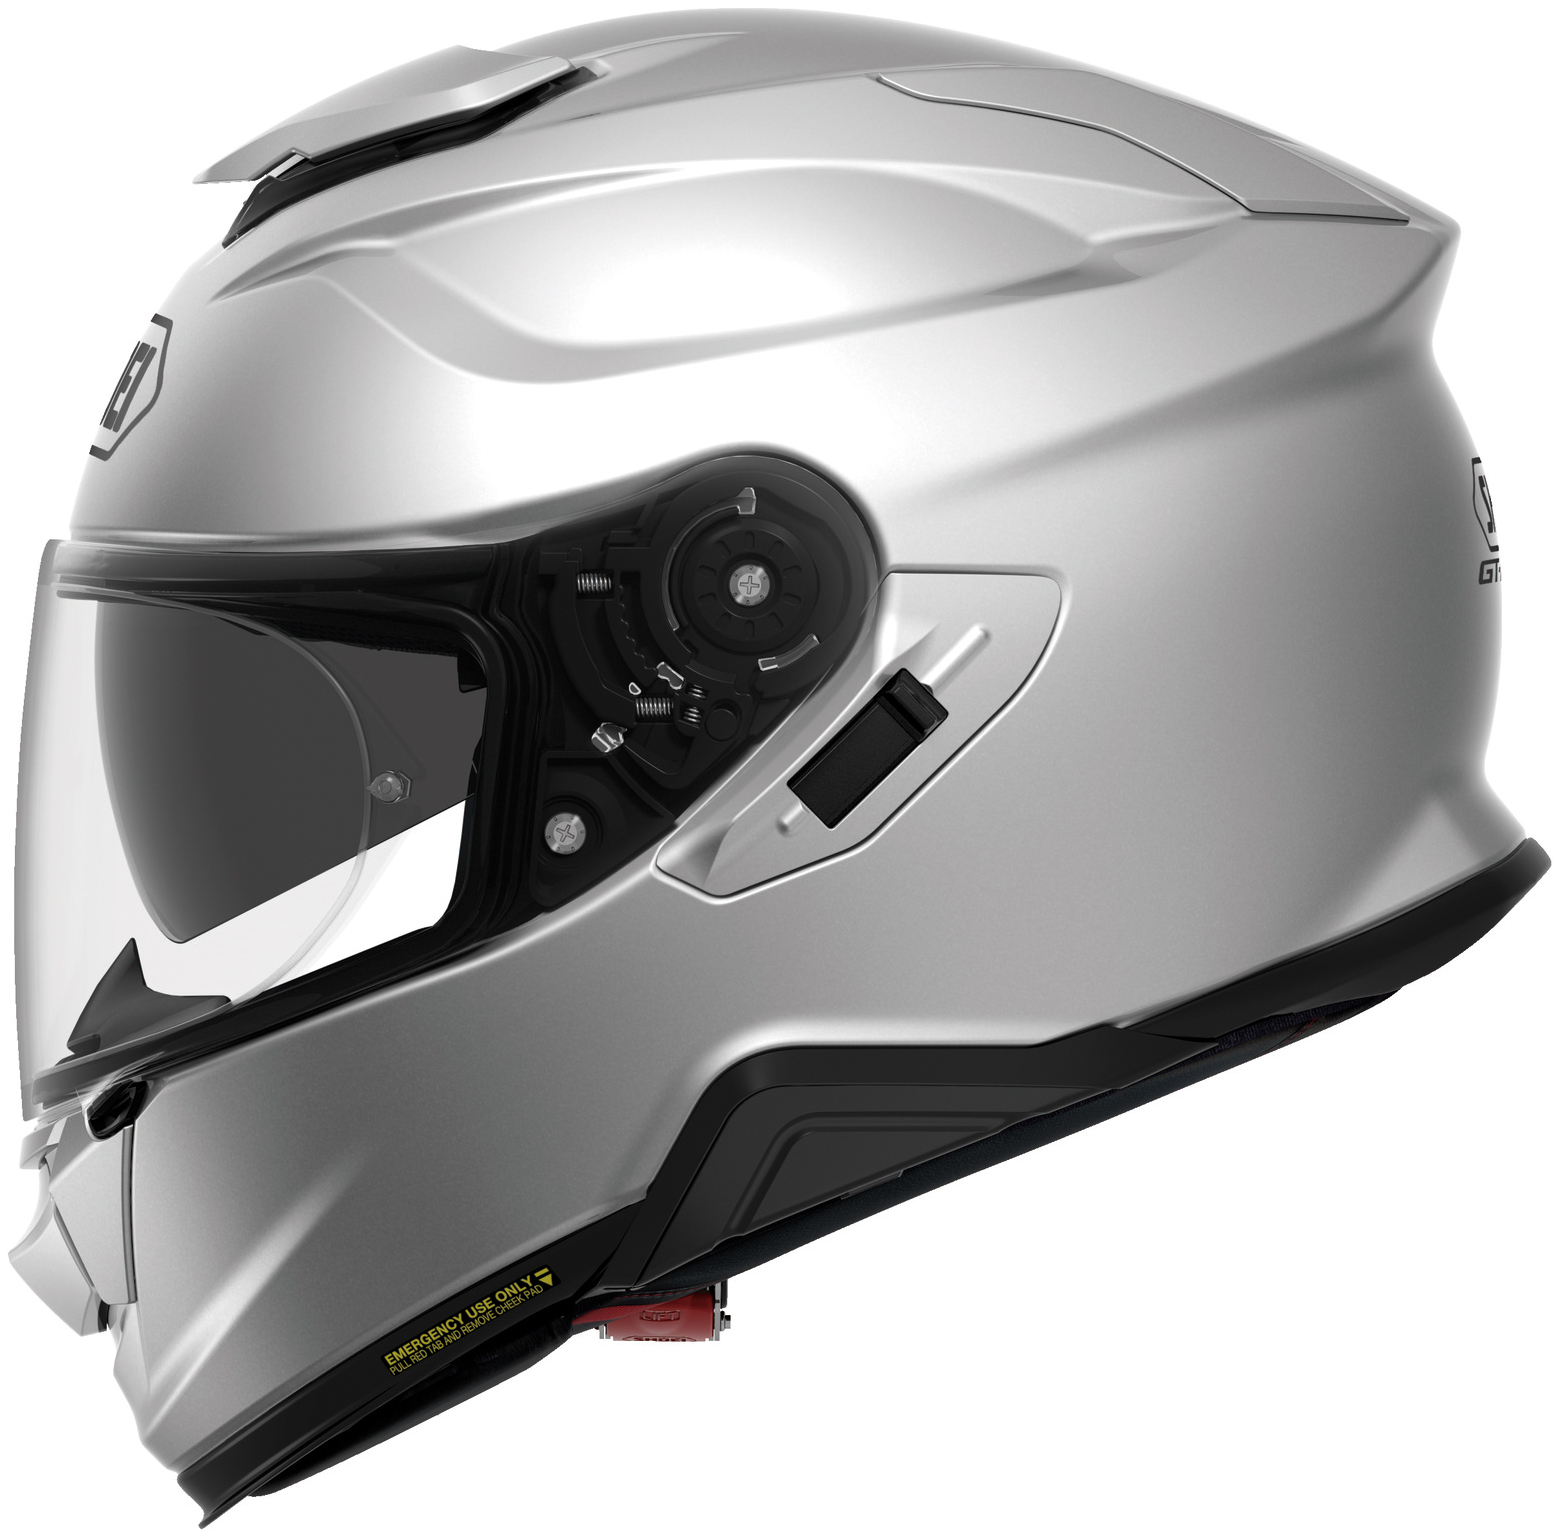 GT-Air 2 Light Silver Full-Face Motorcycle Helmet 2X-Large - Click Image to Close